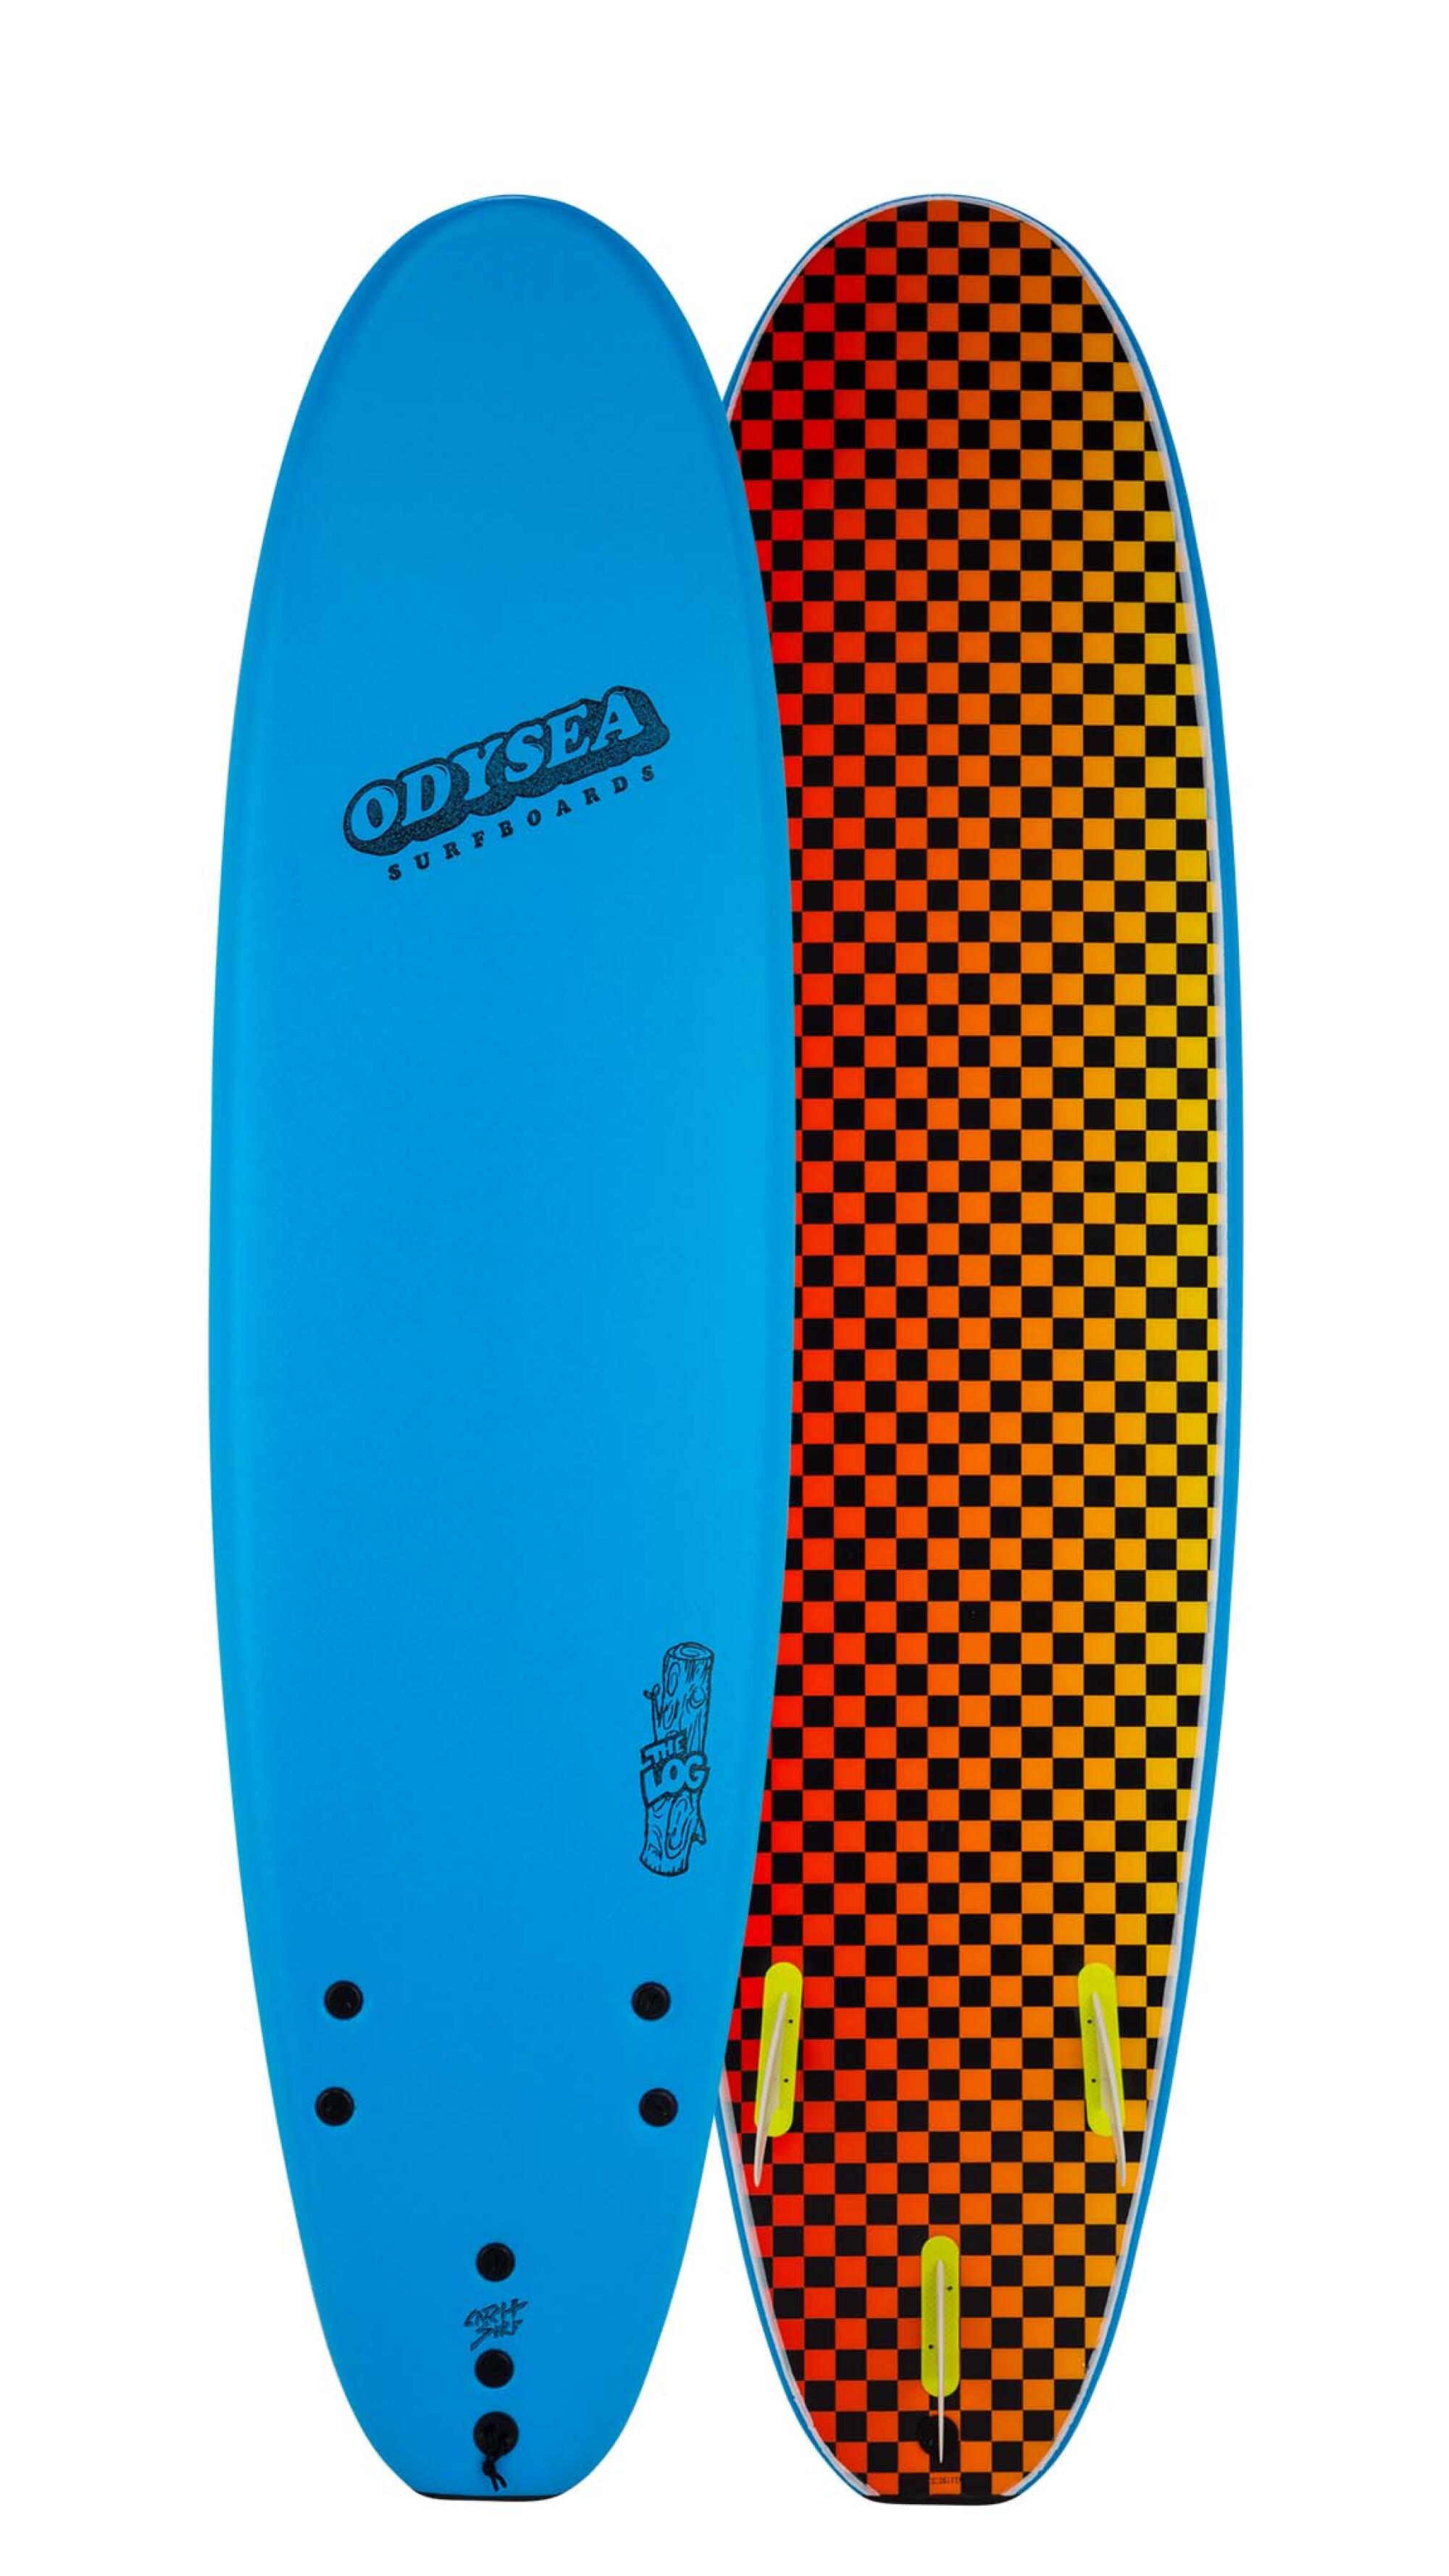 The blue front and checkered back of a foam surfboard